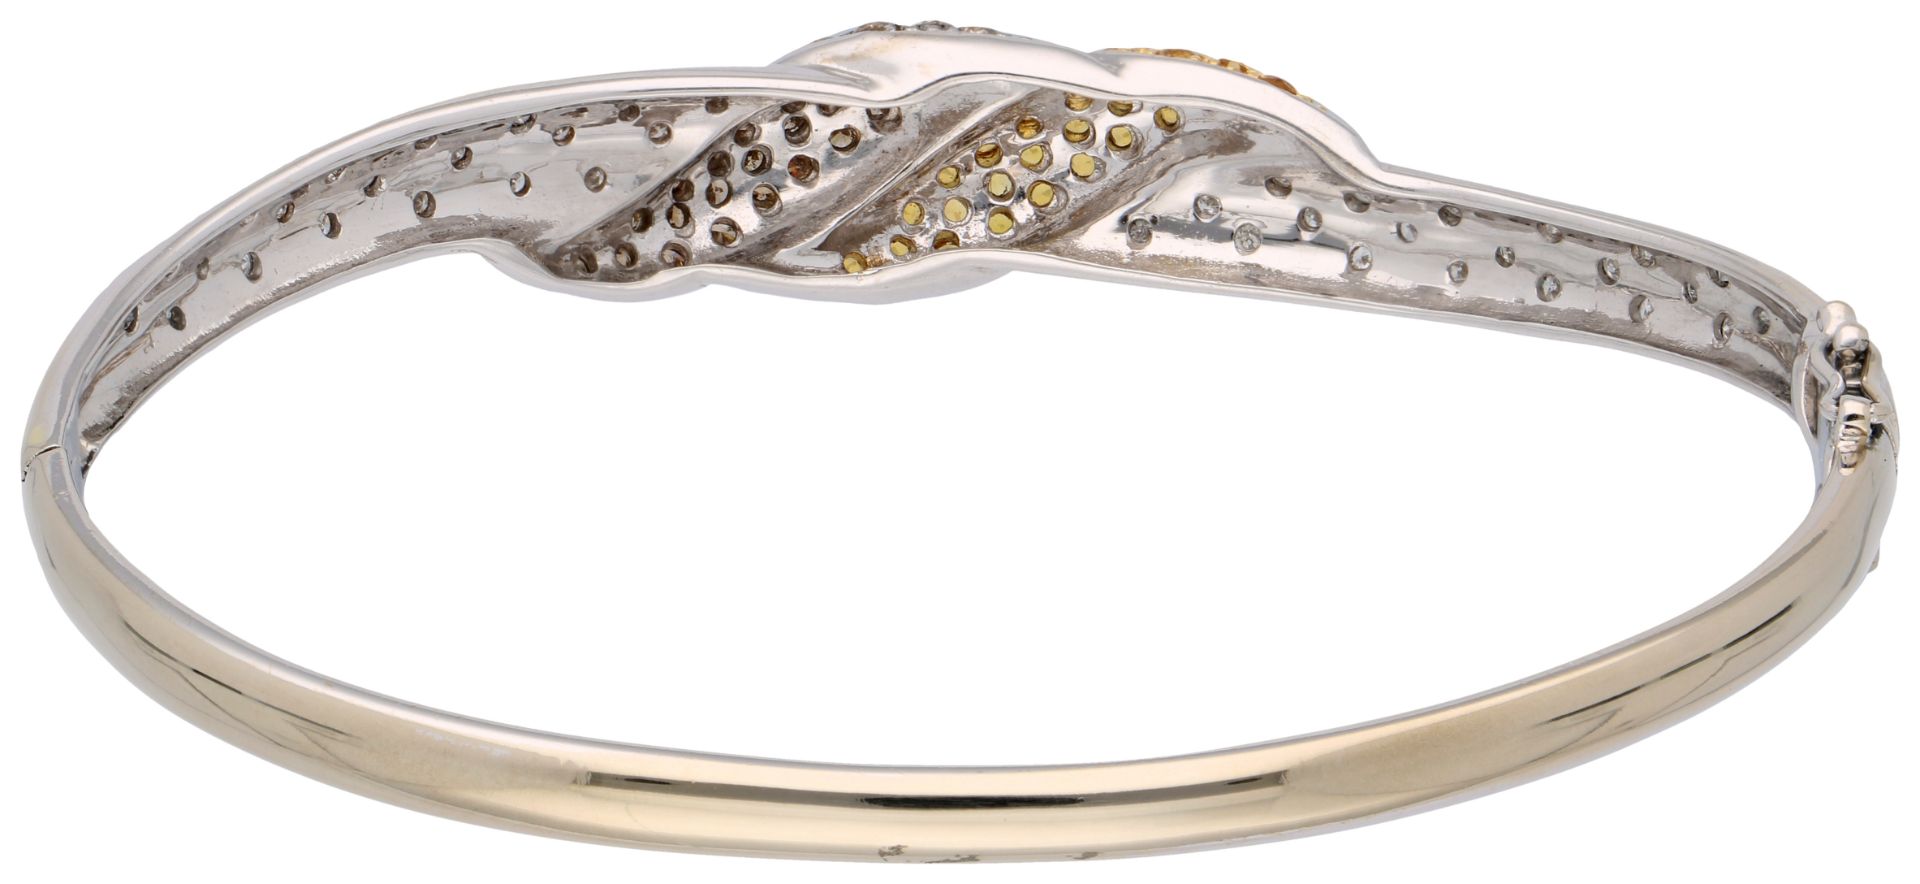 No Reserve - 14K White gold bangle bracelet set with yellow sapphire and approx. 0.68 ct. diamond. - Image 3 of 4